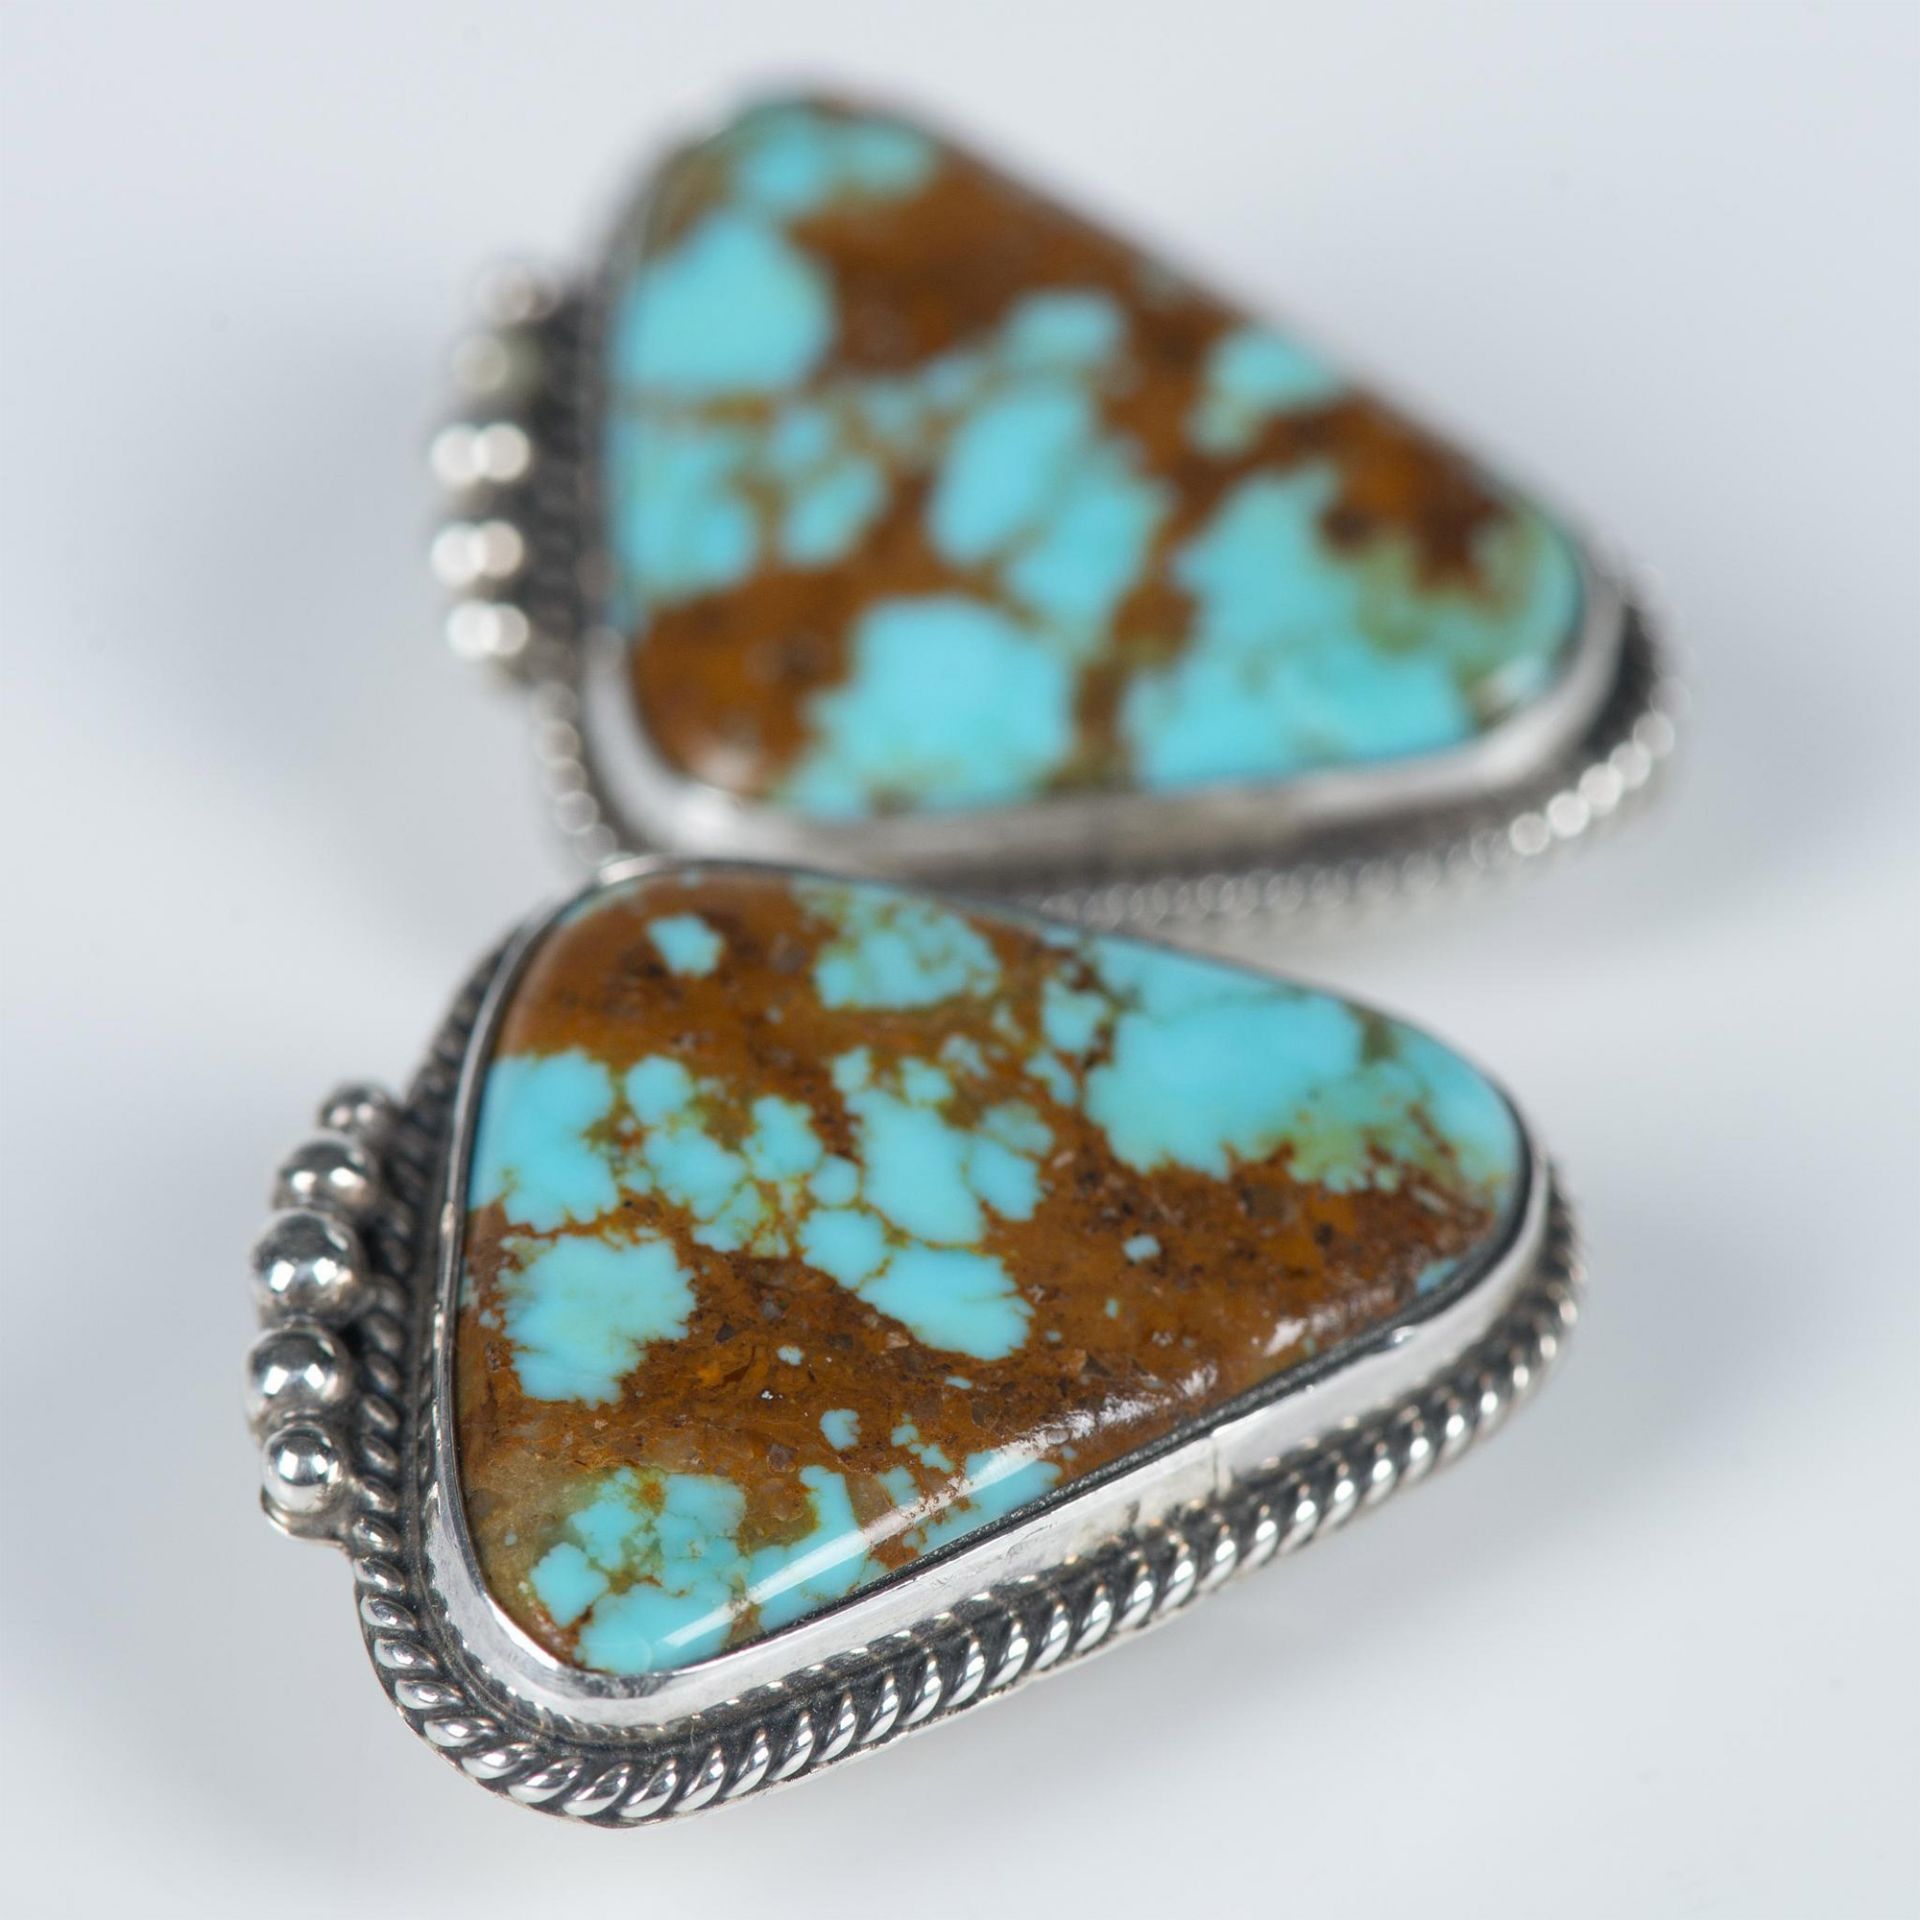 H. Piasso Navajo Sterling Silver & Turquoise Clip Earrings - Image 4 of 4